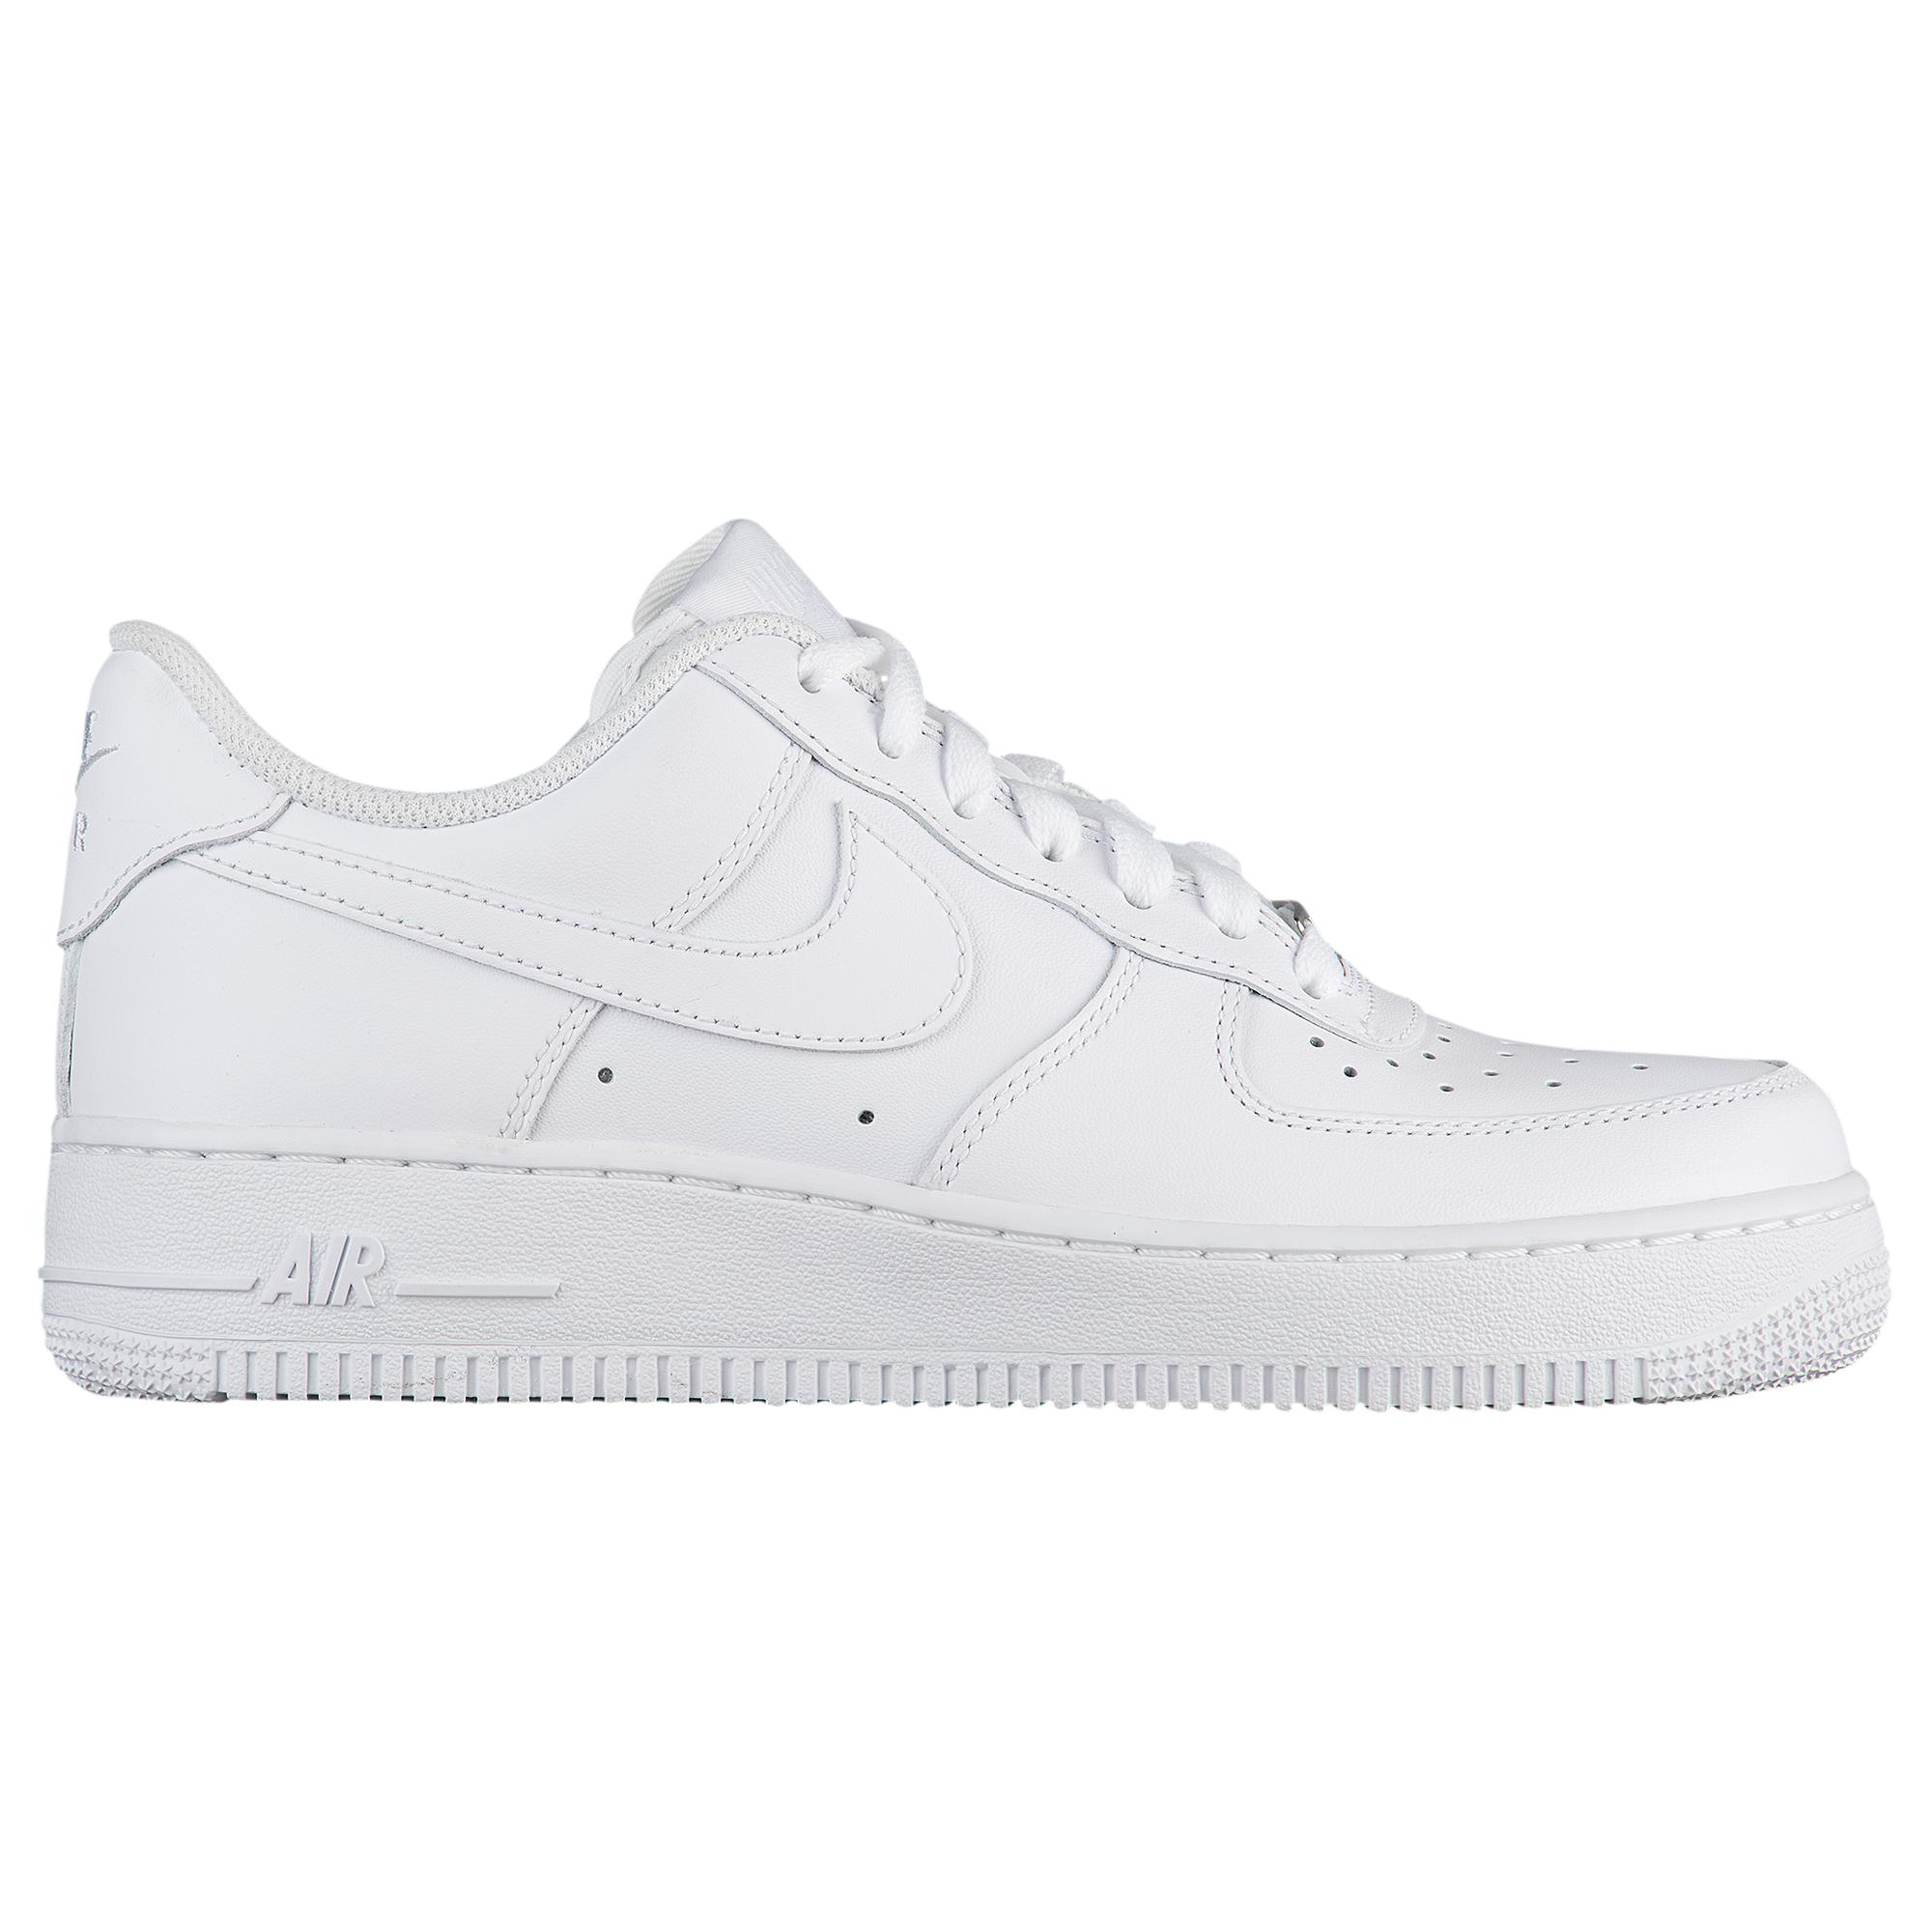 Nike Leather Air Force 1 07 Le Low - Shoes in White/White (White) | Lyst